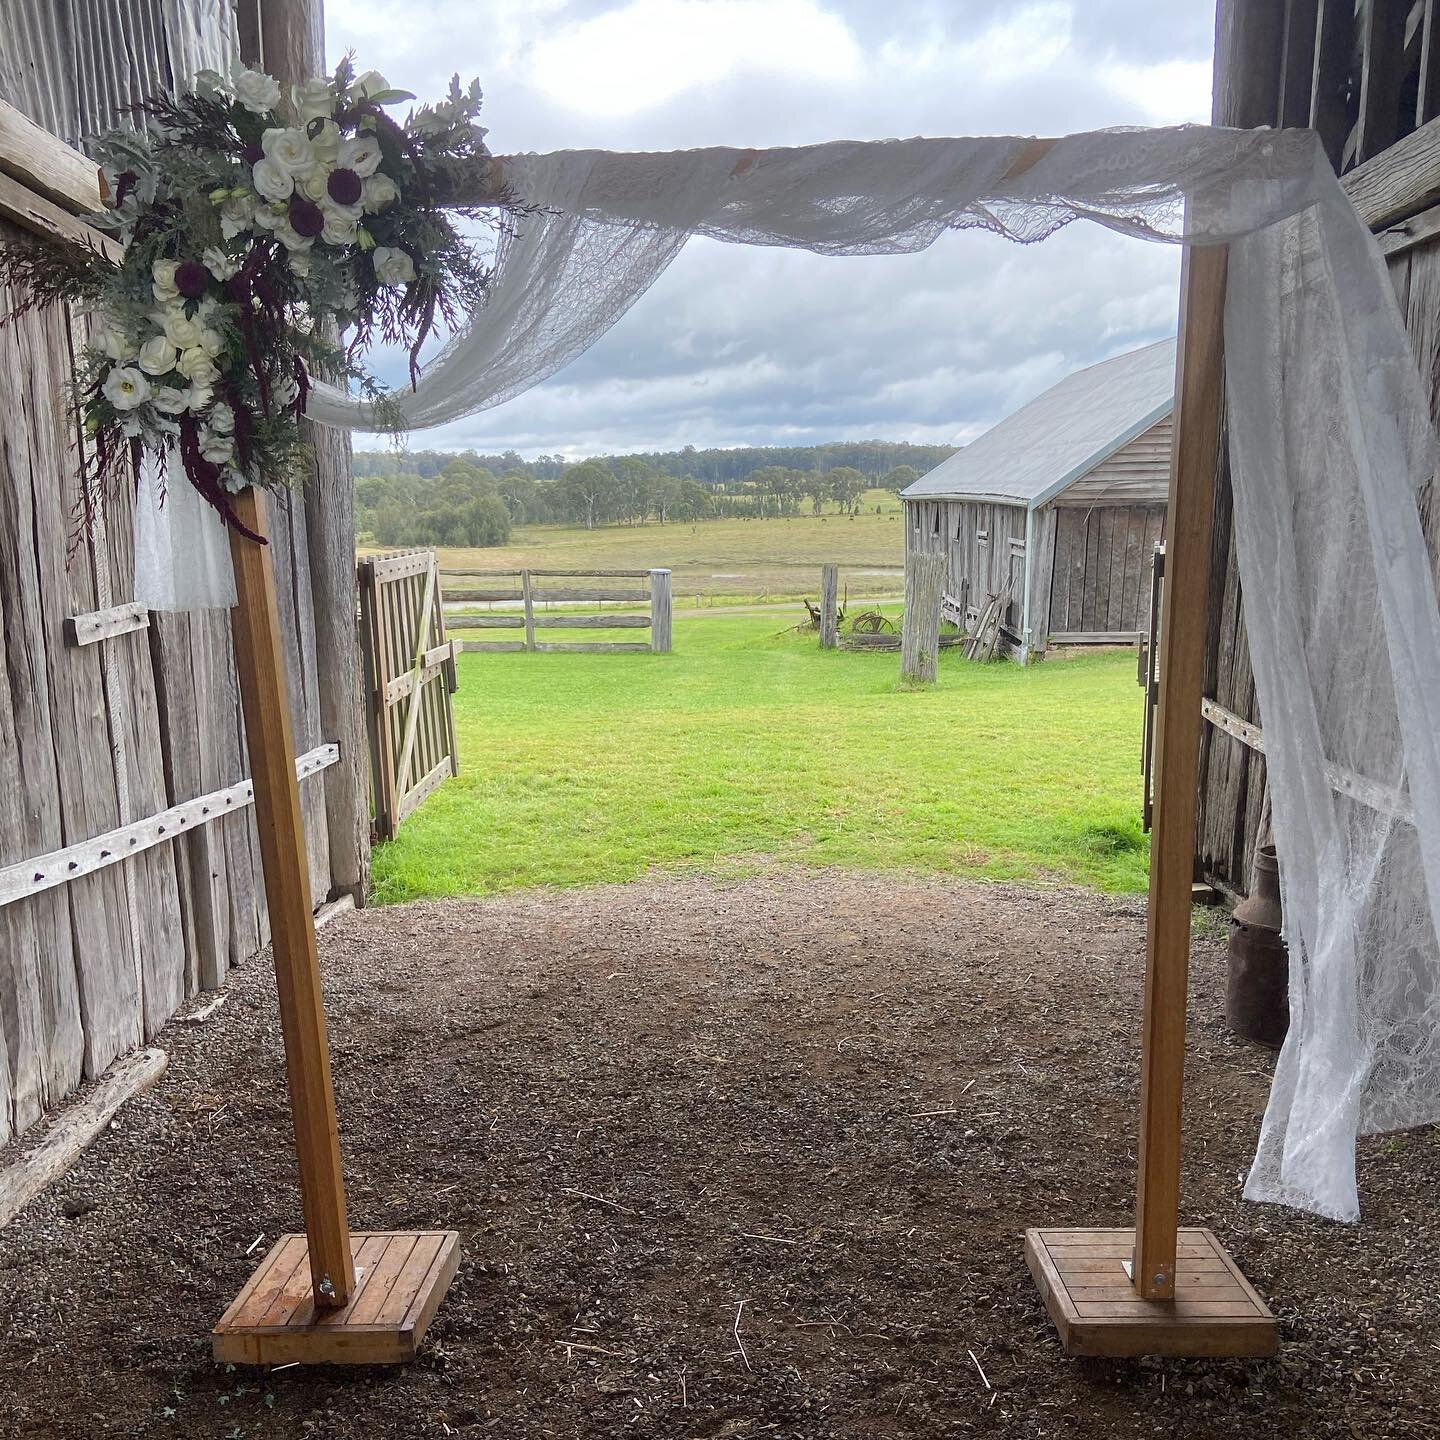 Our set up today was at the beautiful Tocal Homestead. Why does the wind pick up when you go to take a photo? #hunterweddinghire #newcastleflorist #huntervalleywedding #tocalhomestead